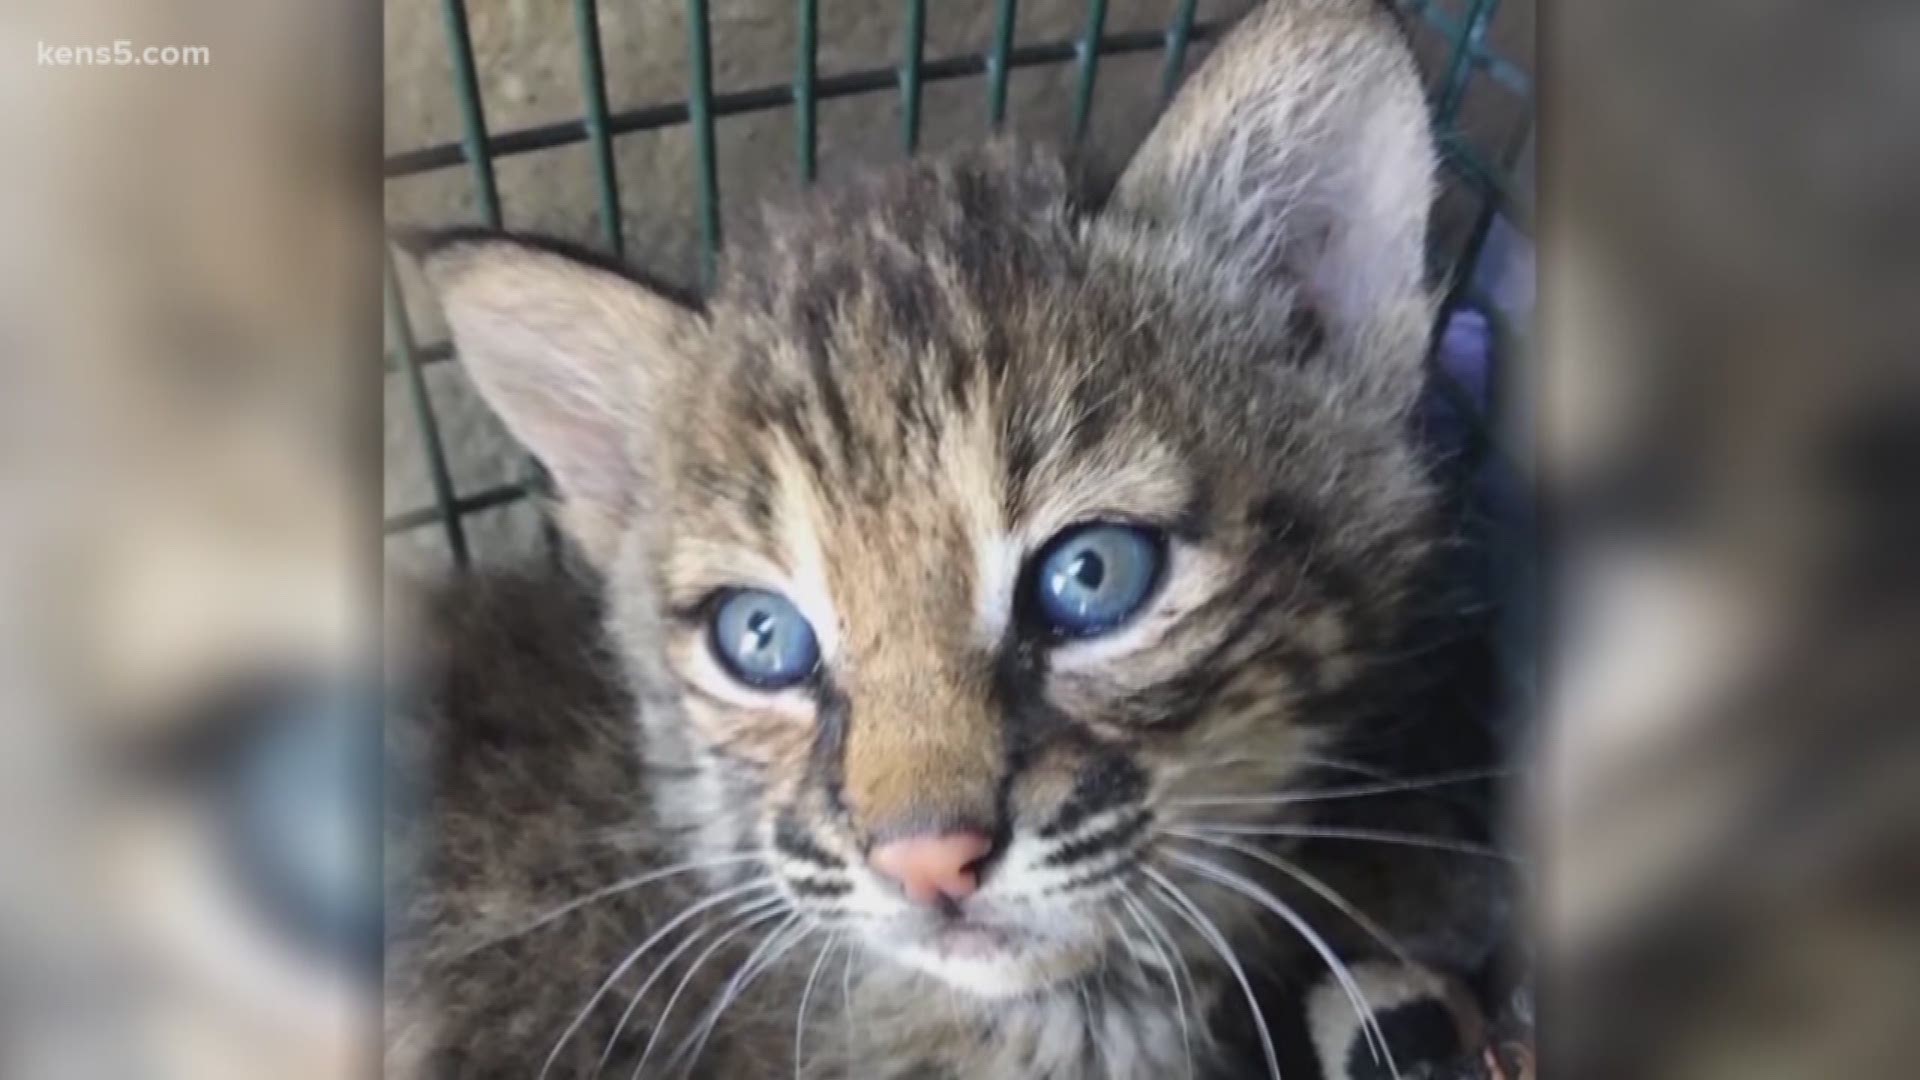 Wildlife Rescue & Rehabilitation is in need of donations to help care for bobcat kittens taken from their natural habitat earlier this week.